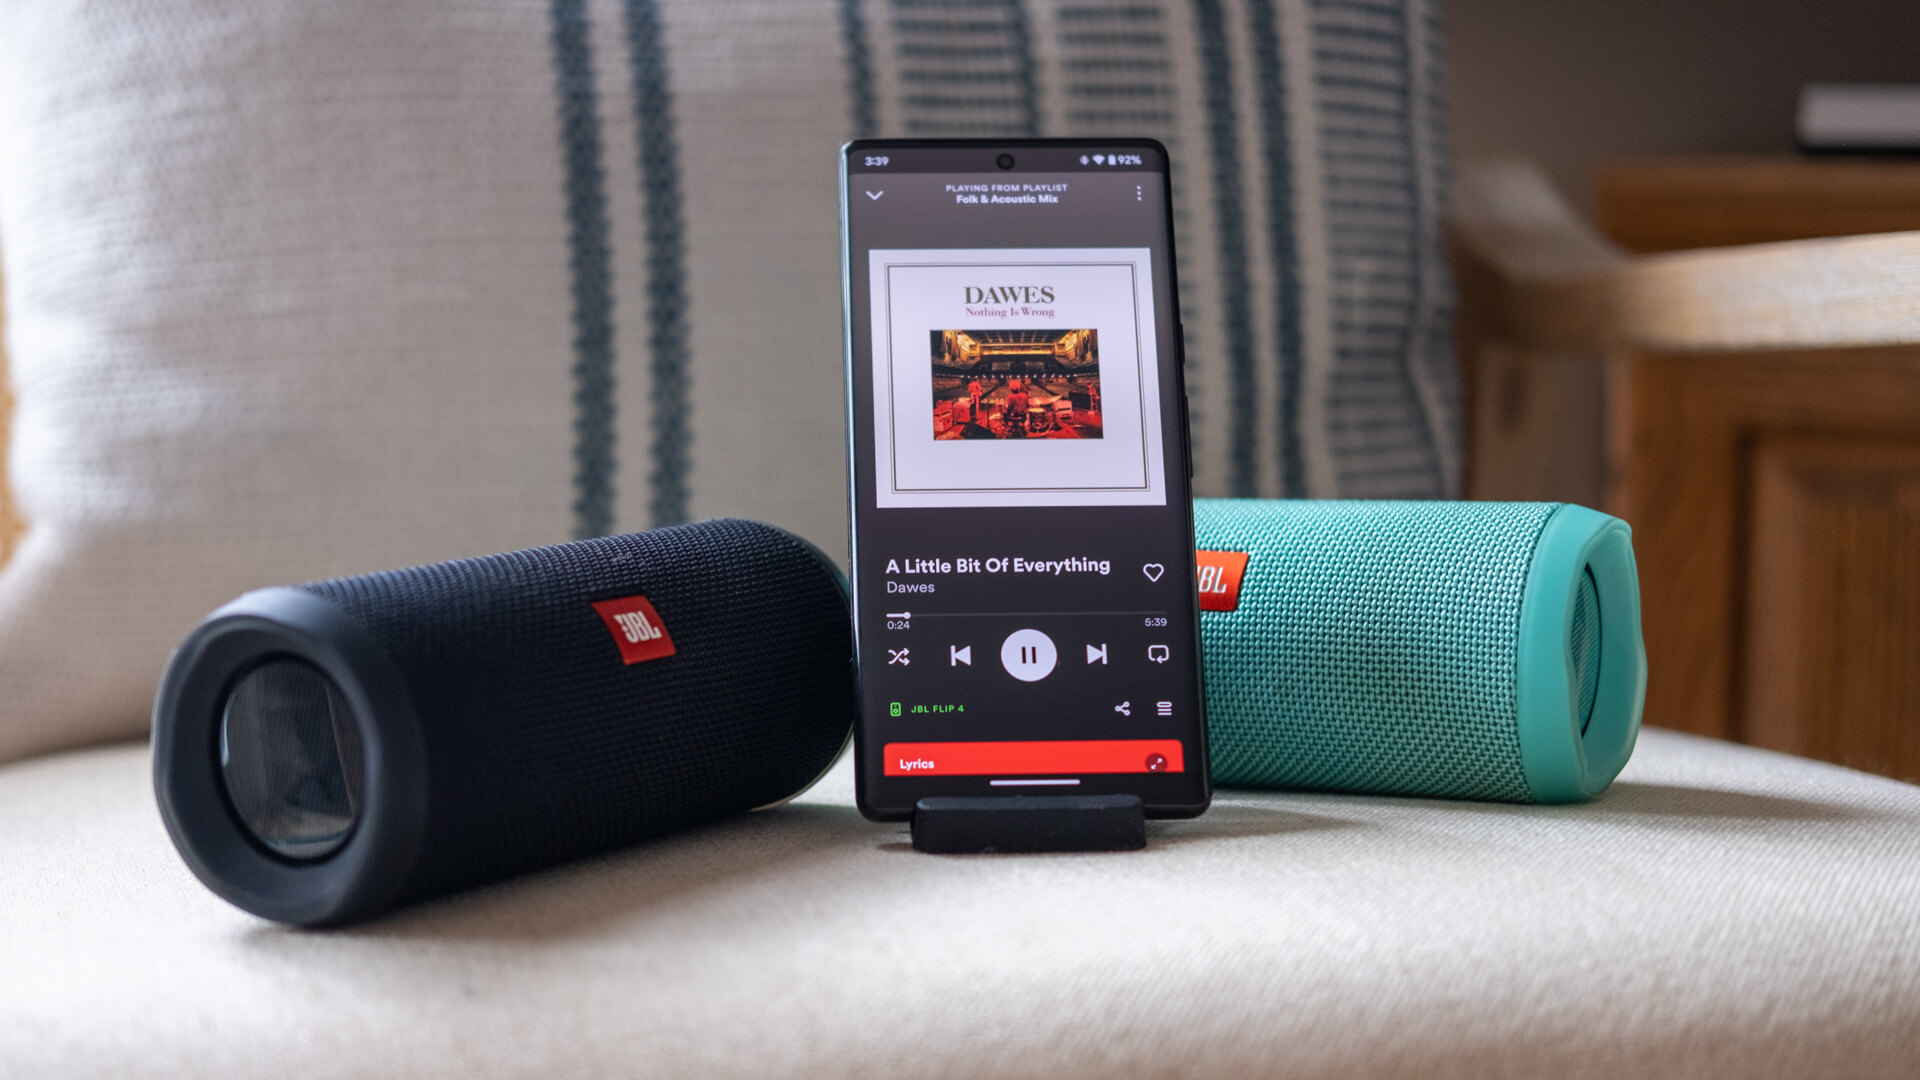 connecting-your-phone-to-a-jbl-speaker-a-step-by-step-guide